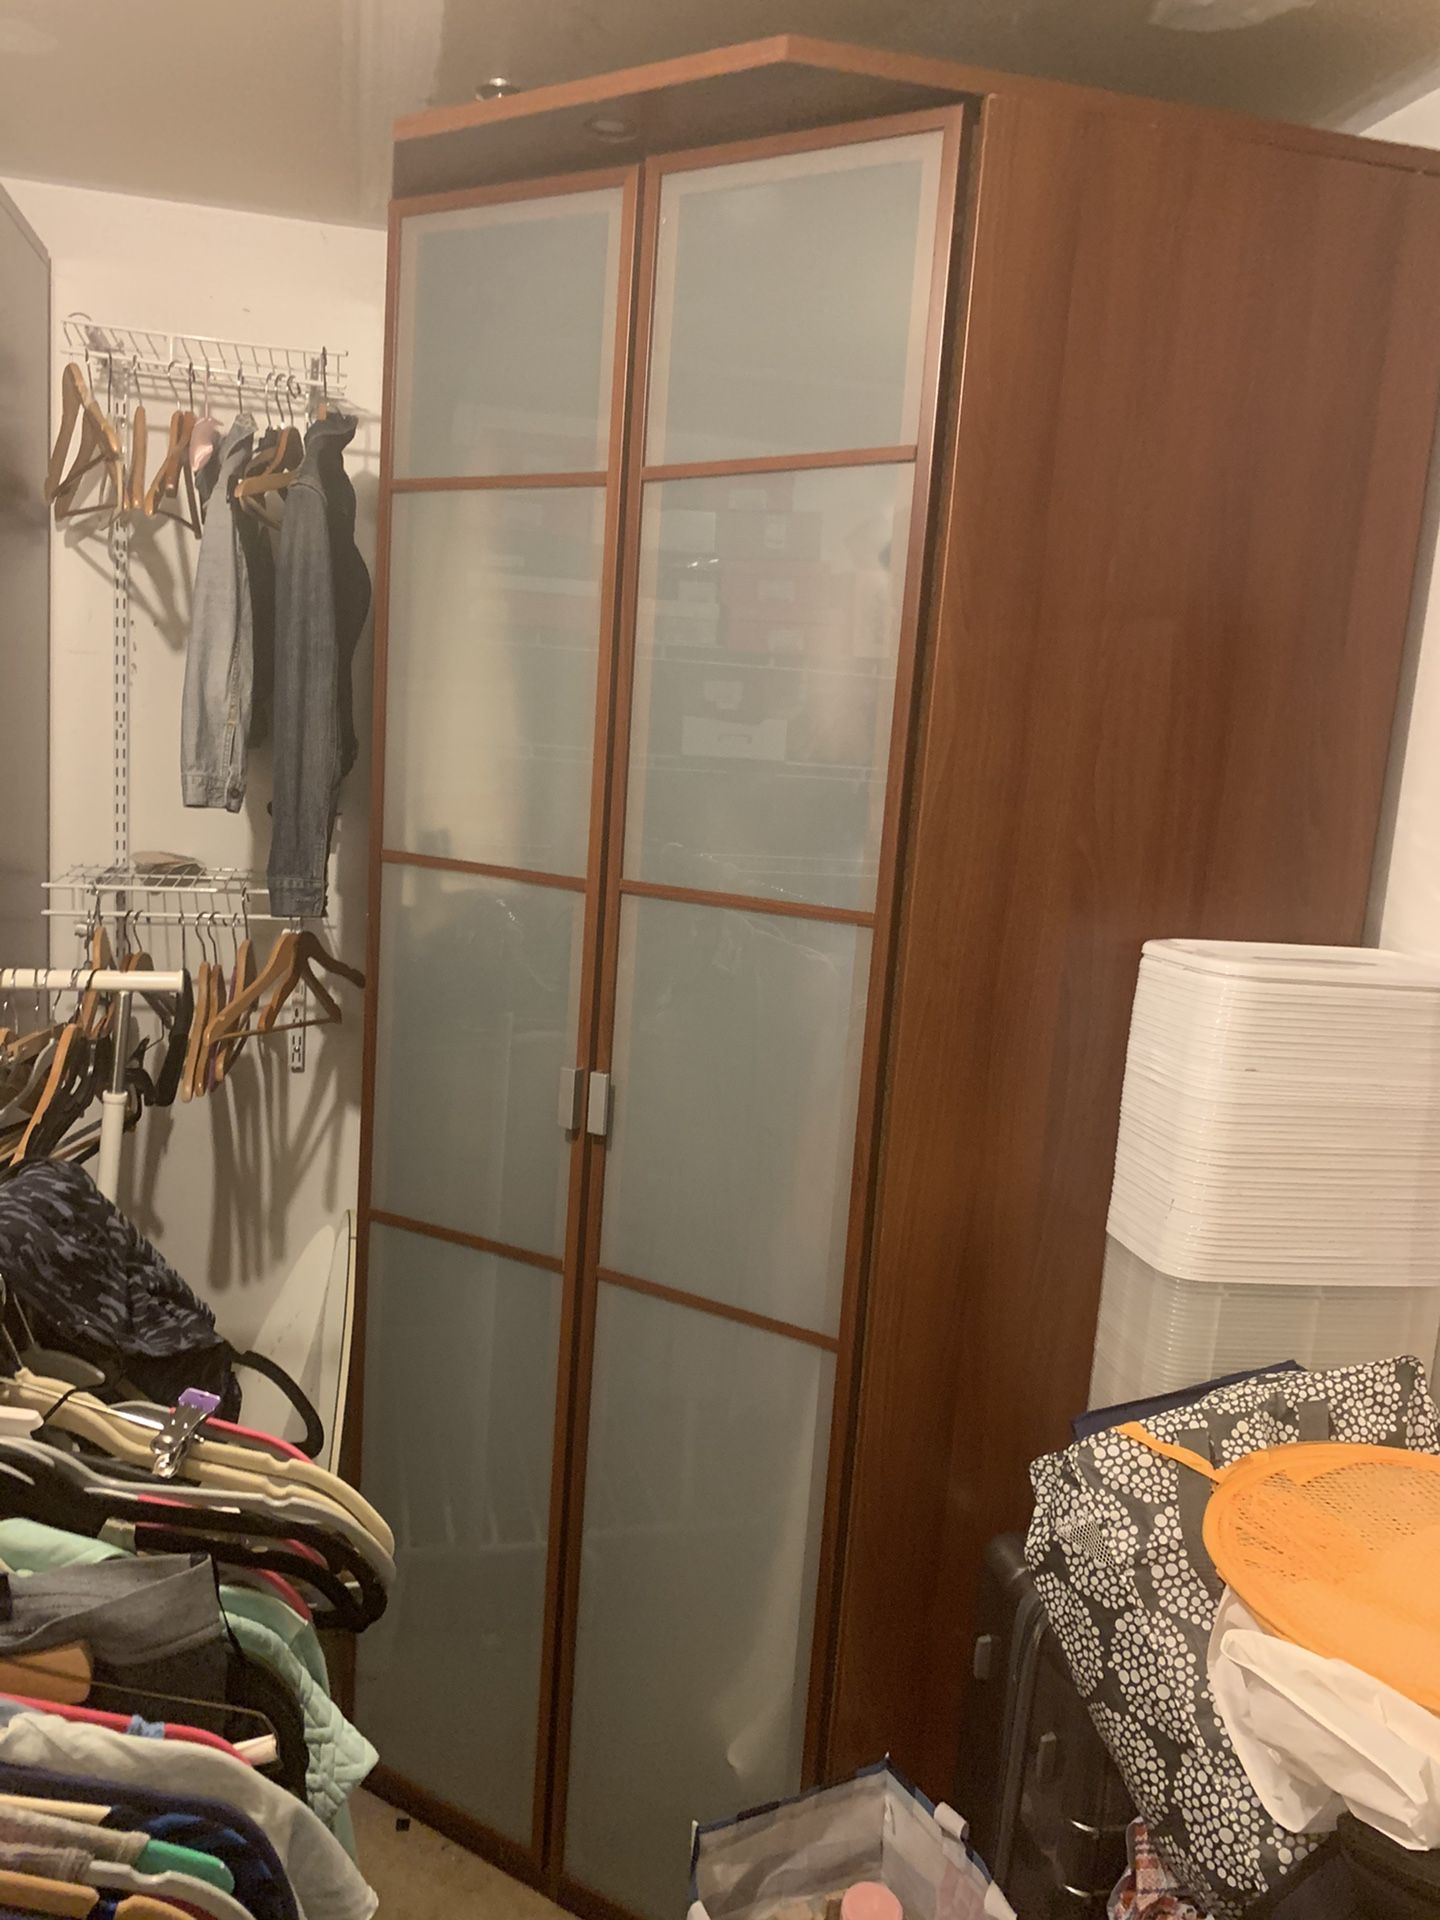 Ikea closet purchase & pick up this week